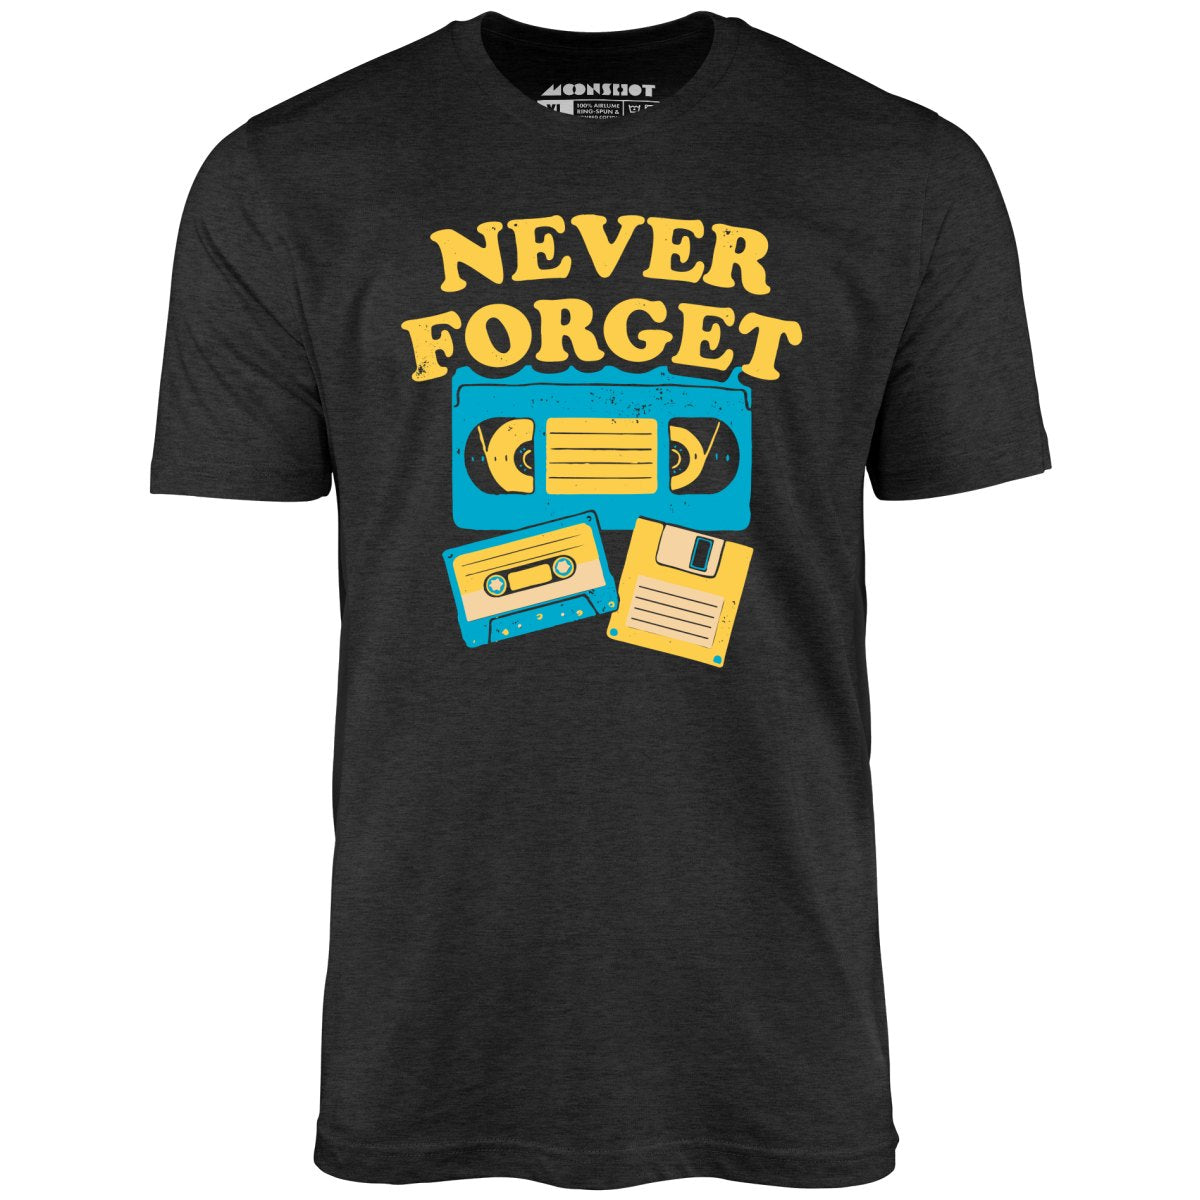 Never Forget - Unisex T-Shirt